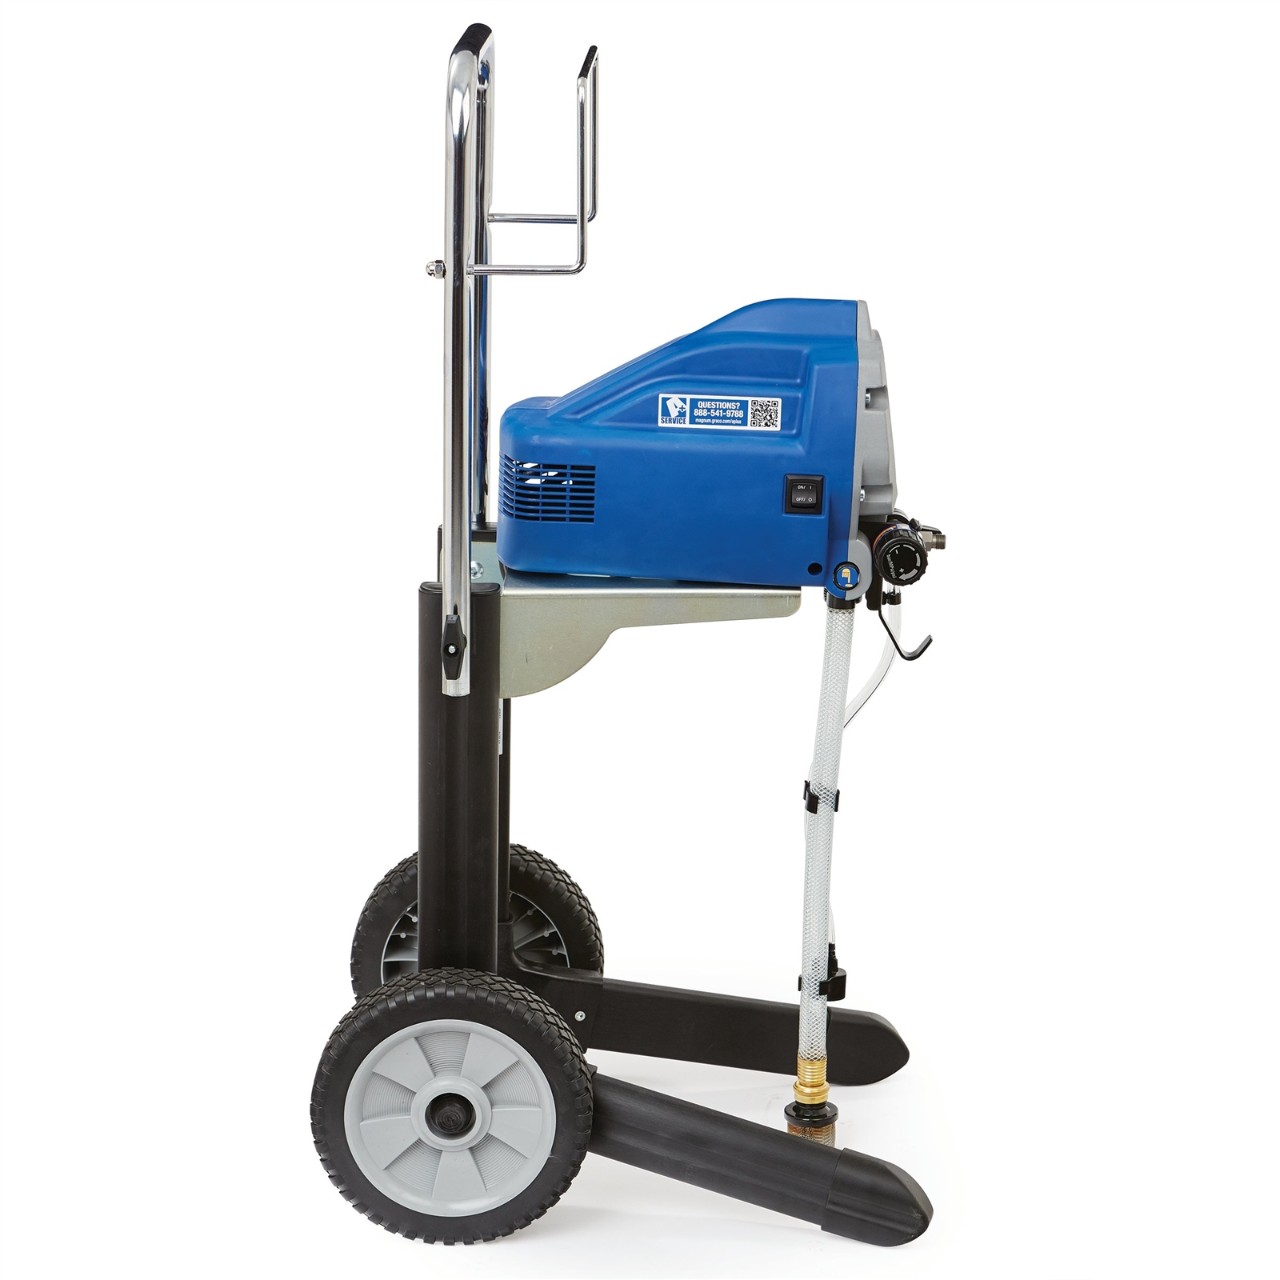 Graco Airless Paint Sprayer, 5/8 HP, 0.31 gpm Flow Rate, Operating  Pressure: 3000 psi